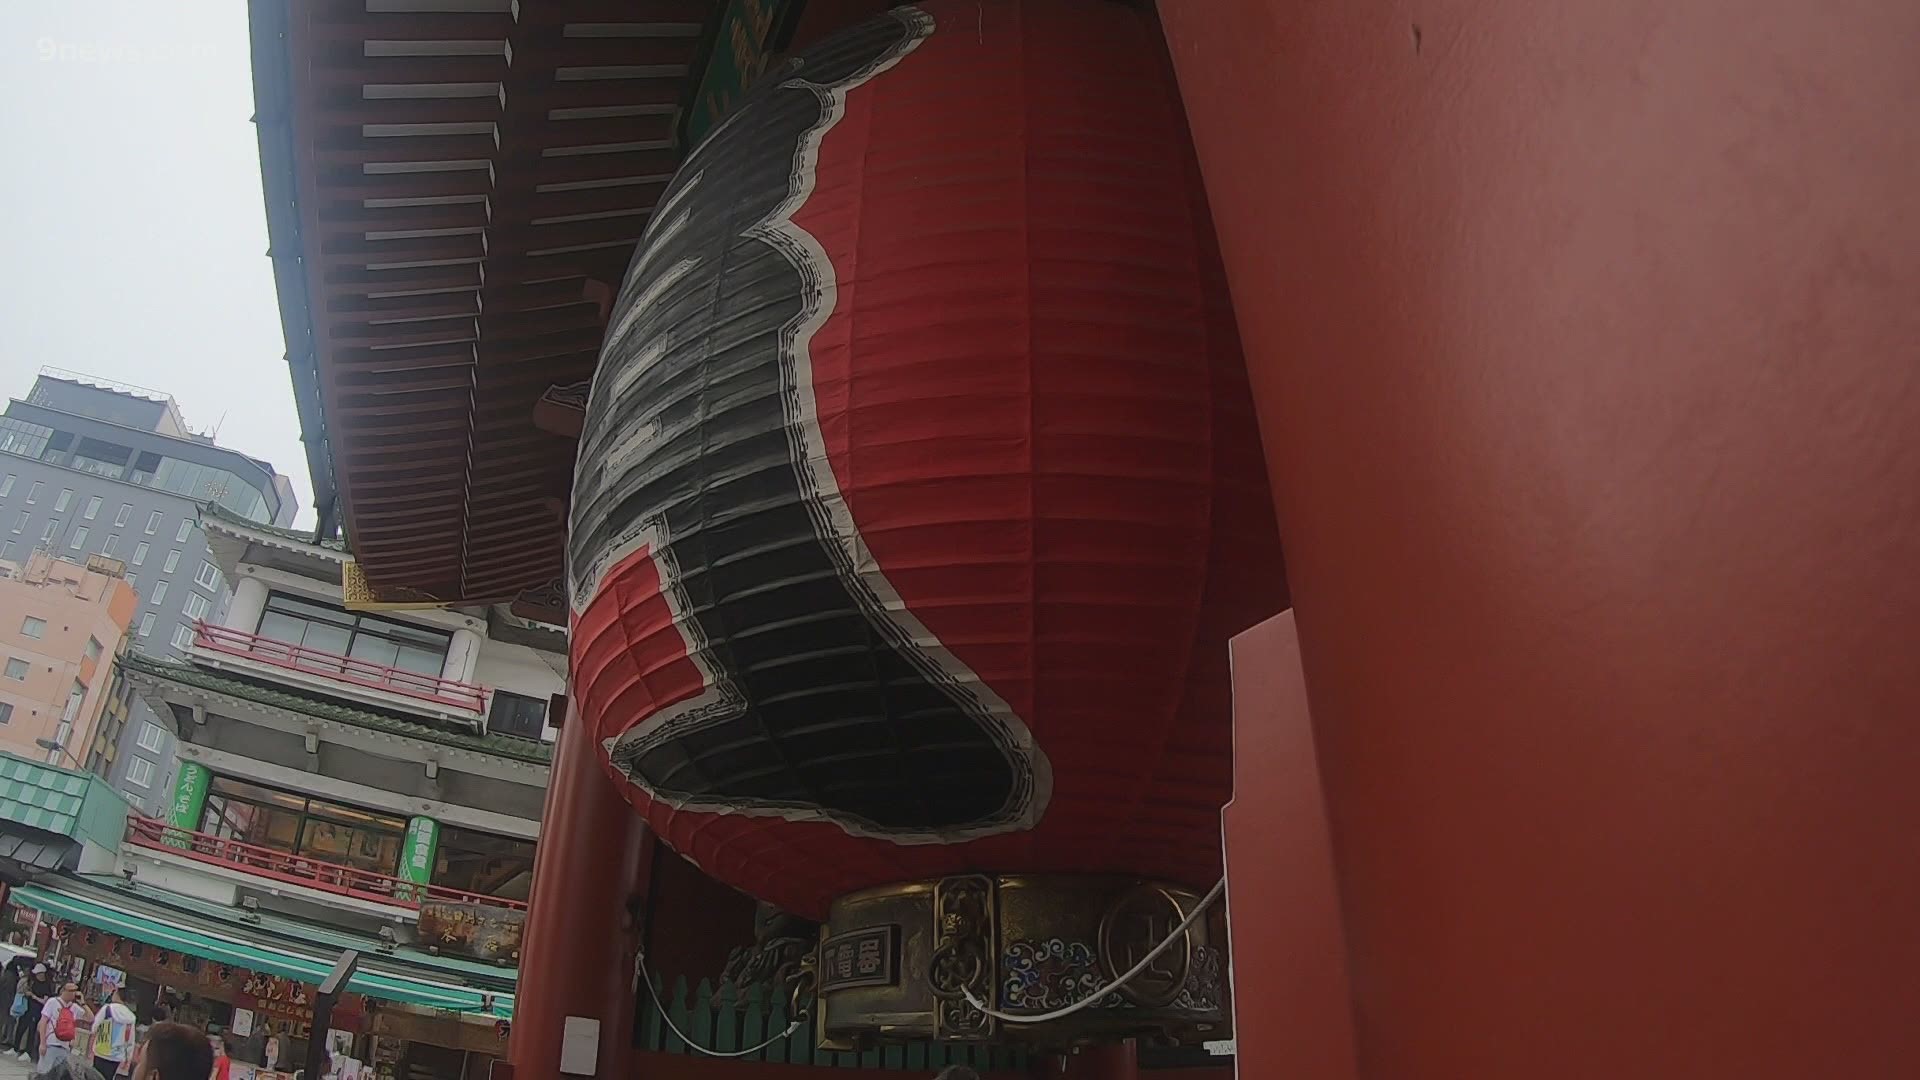 Matt Renoux shows us a must-see part of Tokyo centered around a big part of Japanese culture, giant paper lanterns.